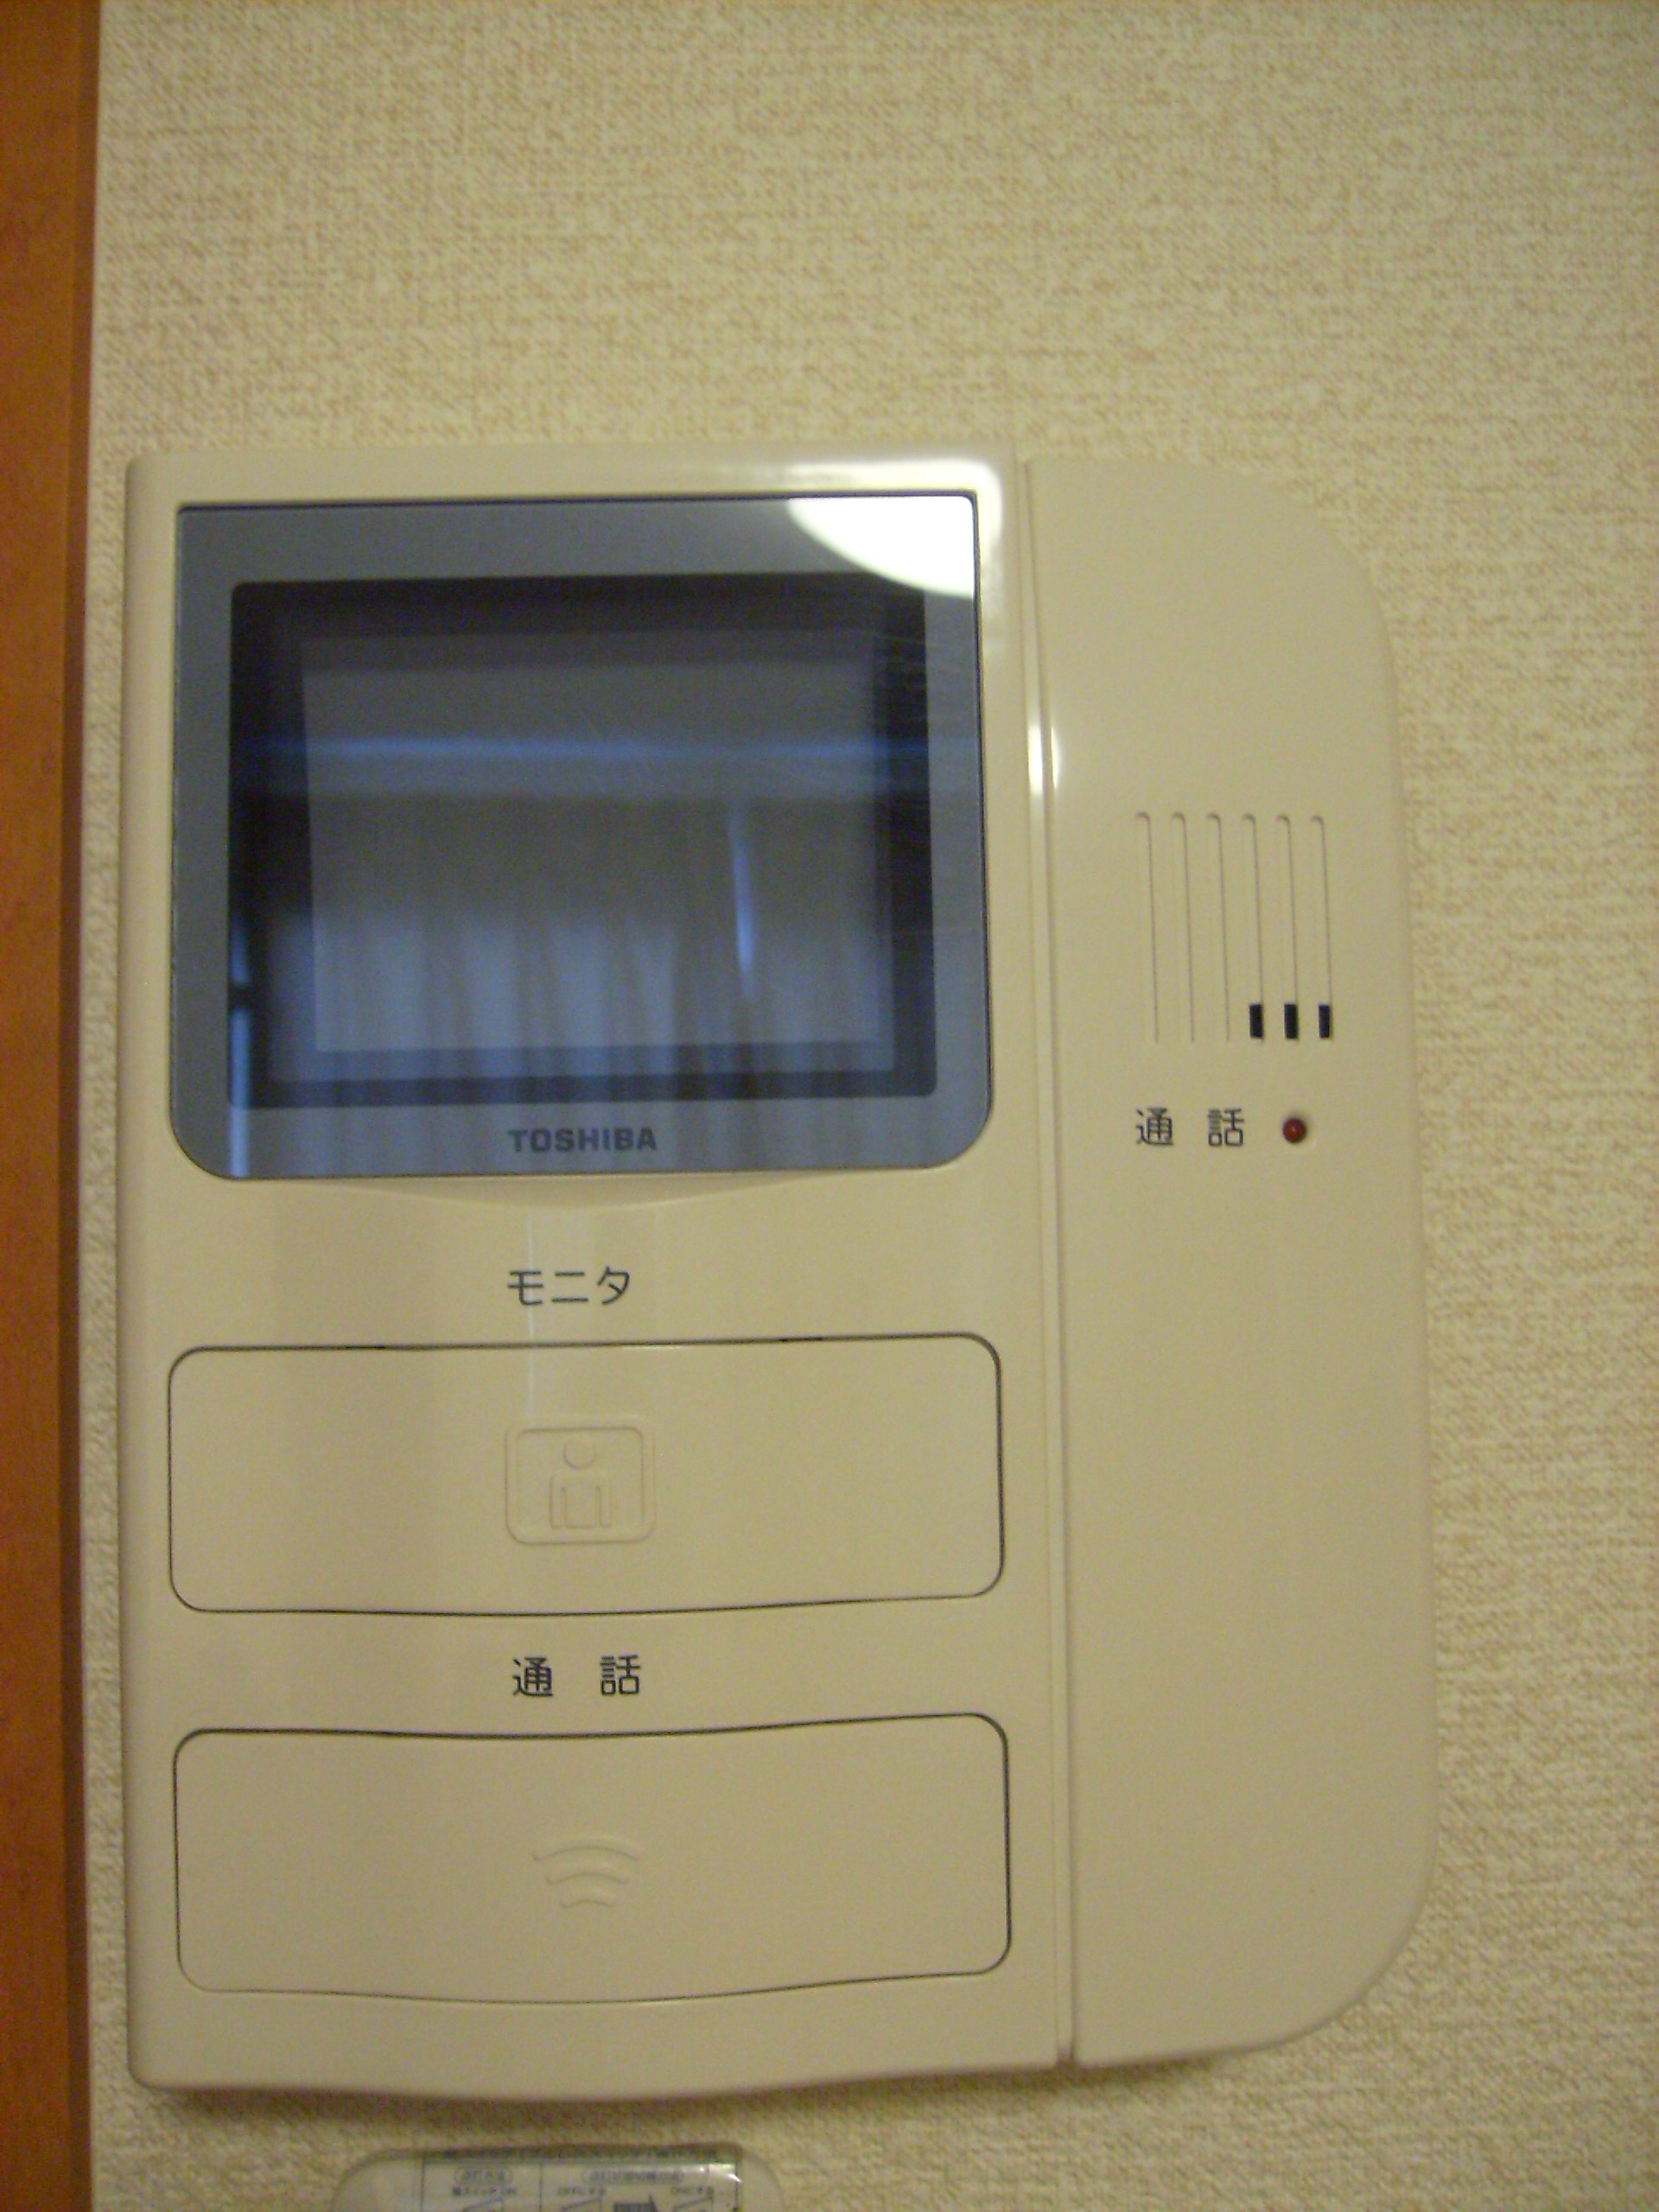 Other Equipment. Intercom with TV monitor